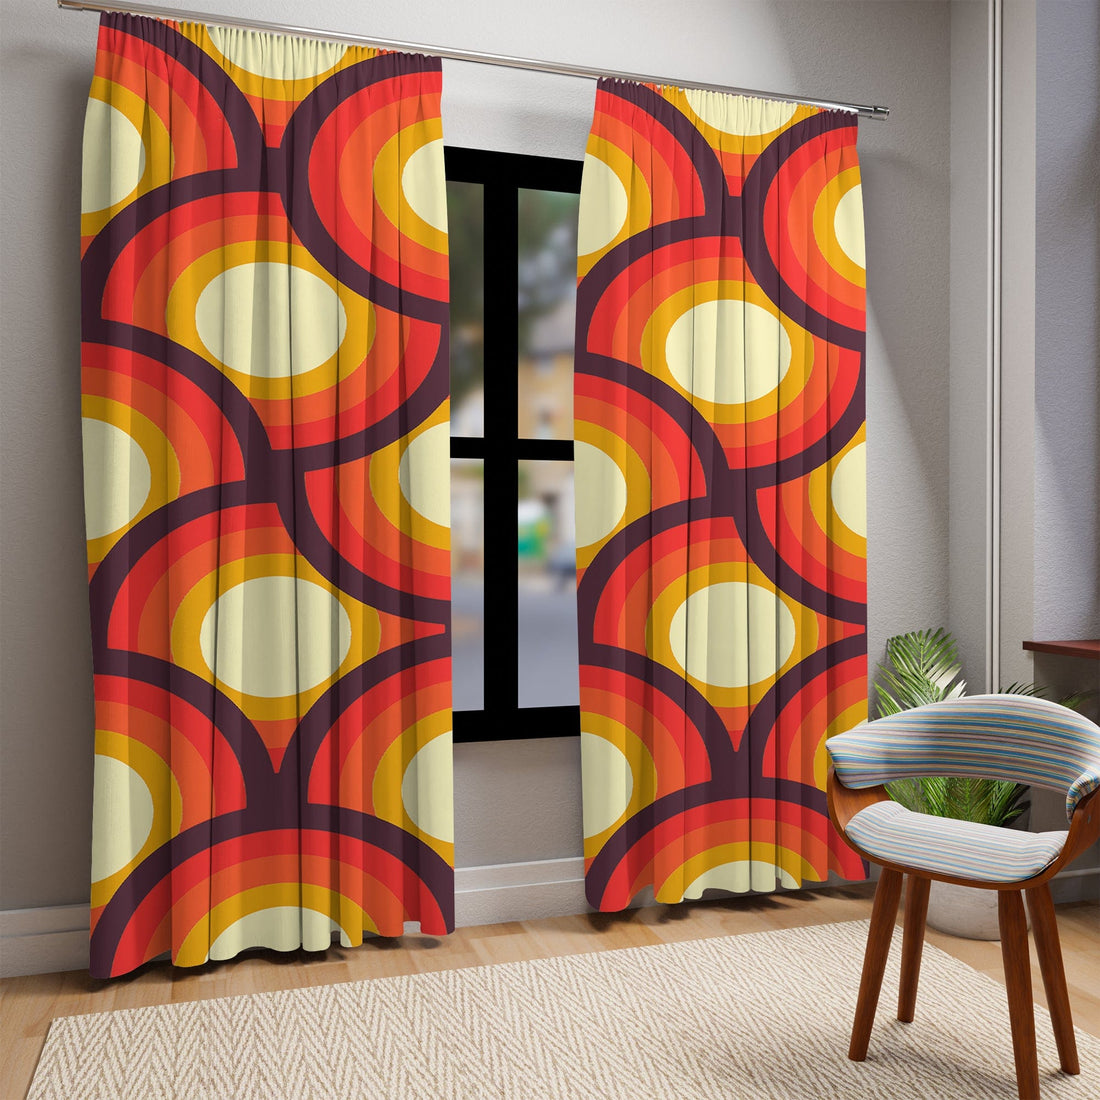 Blackout &amp; Sheer Window Curtains in Mid Century Modern Geometric Circles